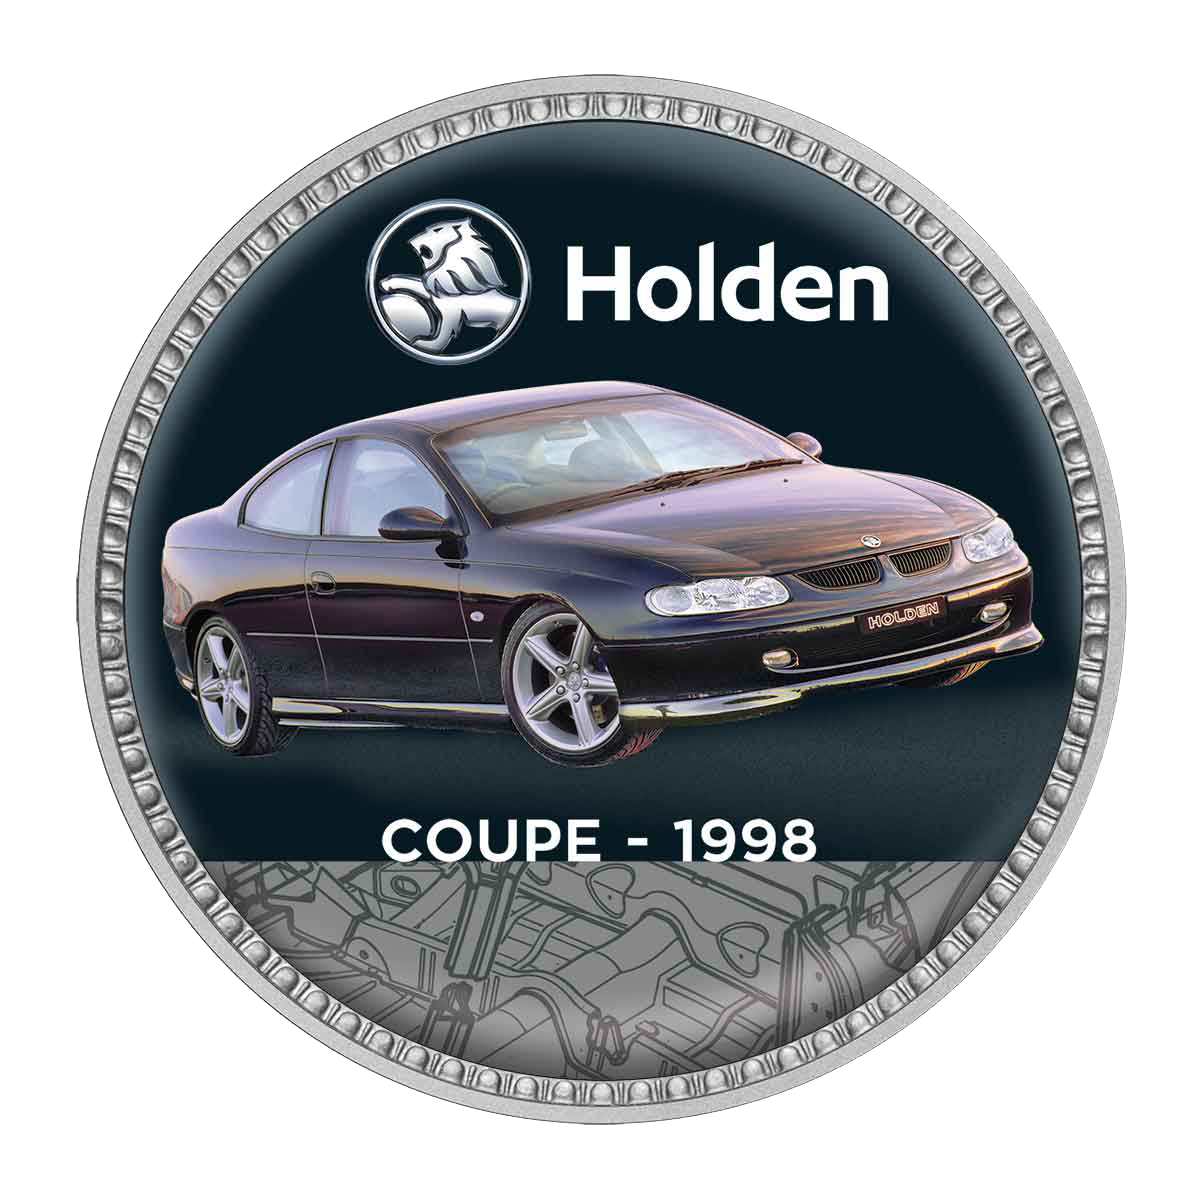 Holden Concept Cars Featured on Genuine Australian Pennies